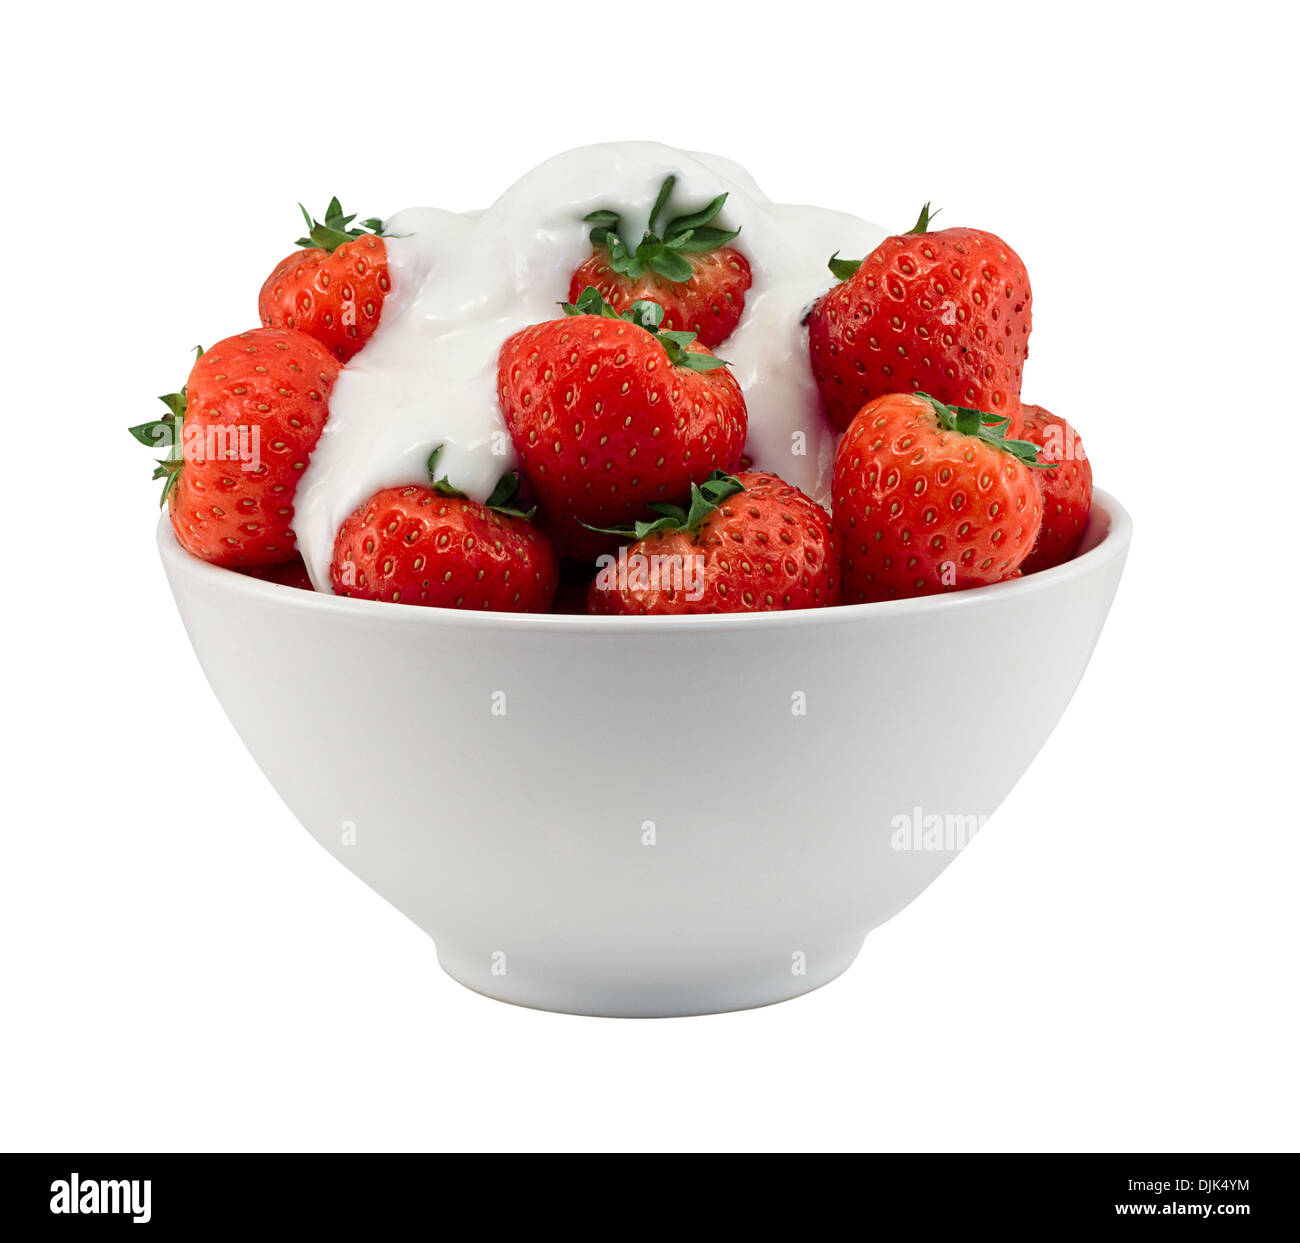 Strawberries and cream in a bowl isolated against a white background Stock Photo